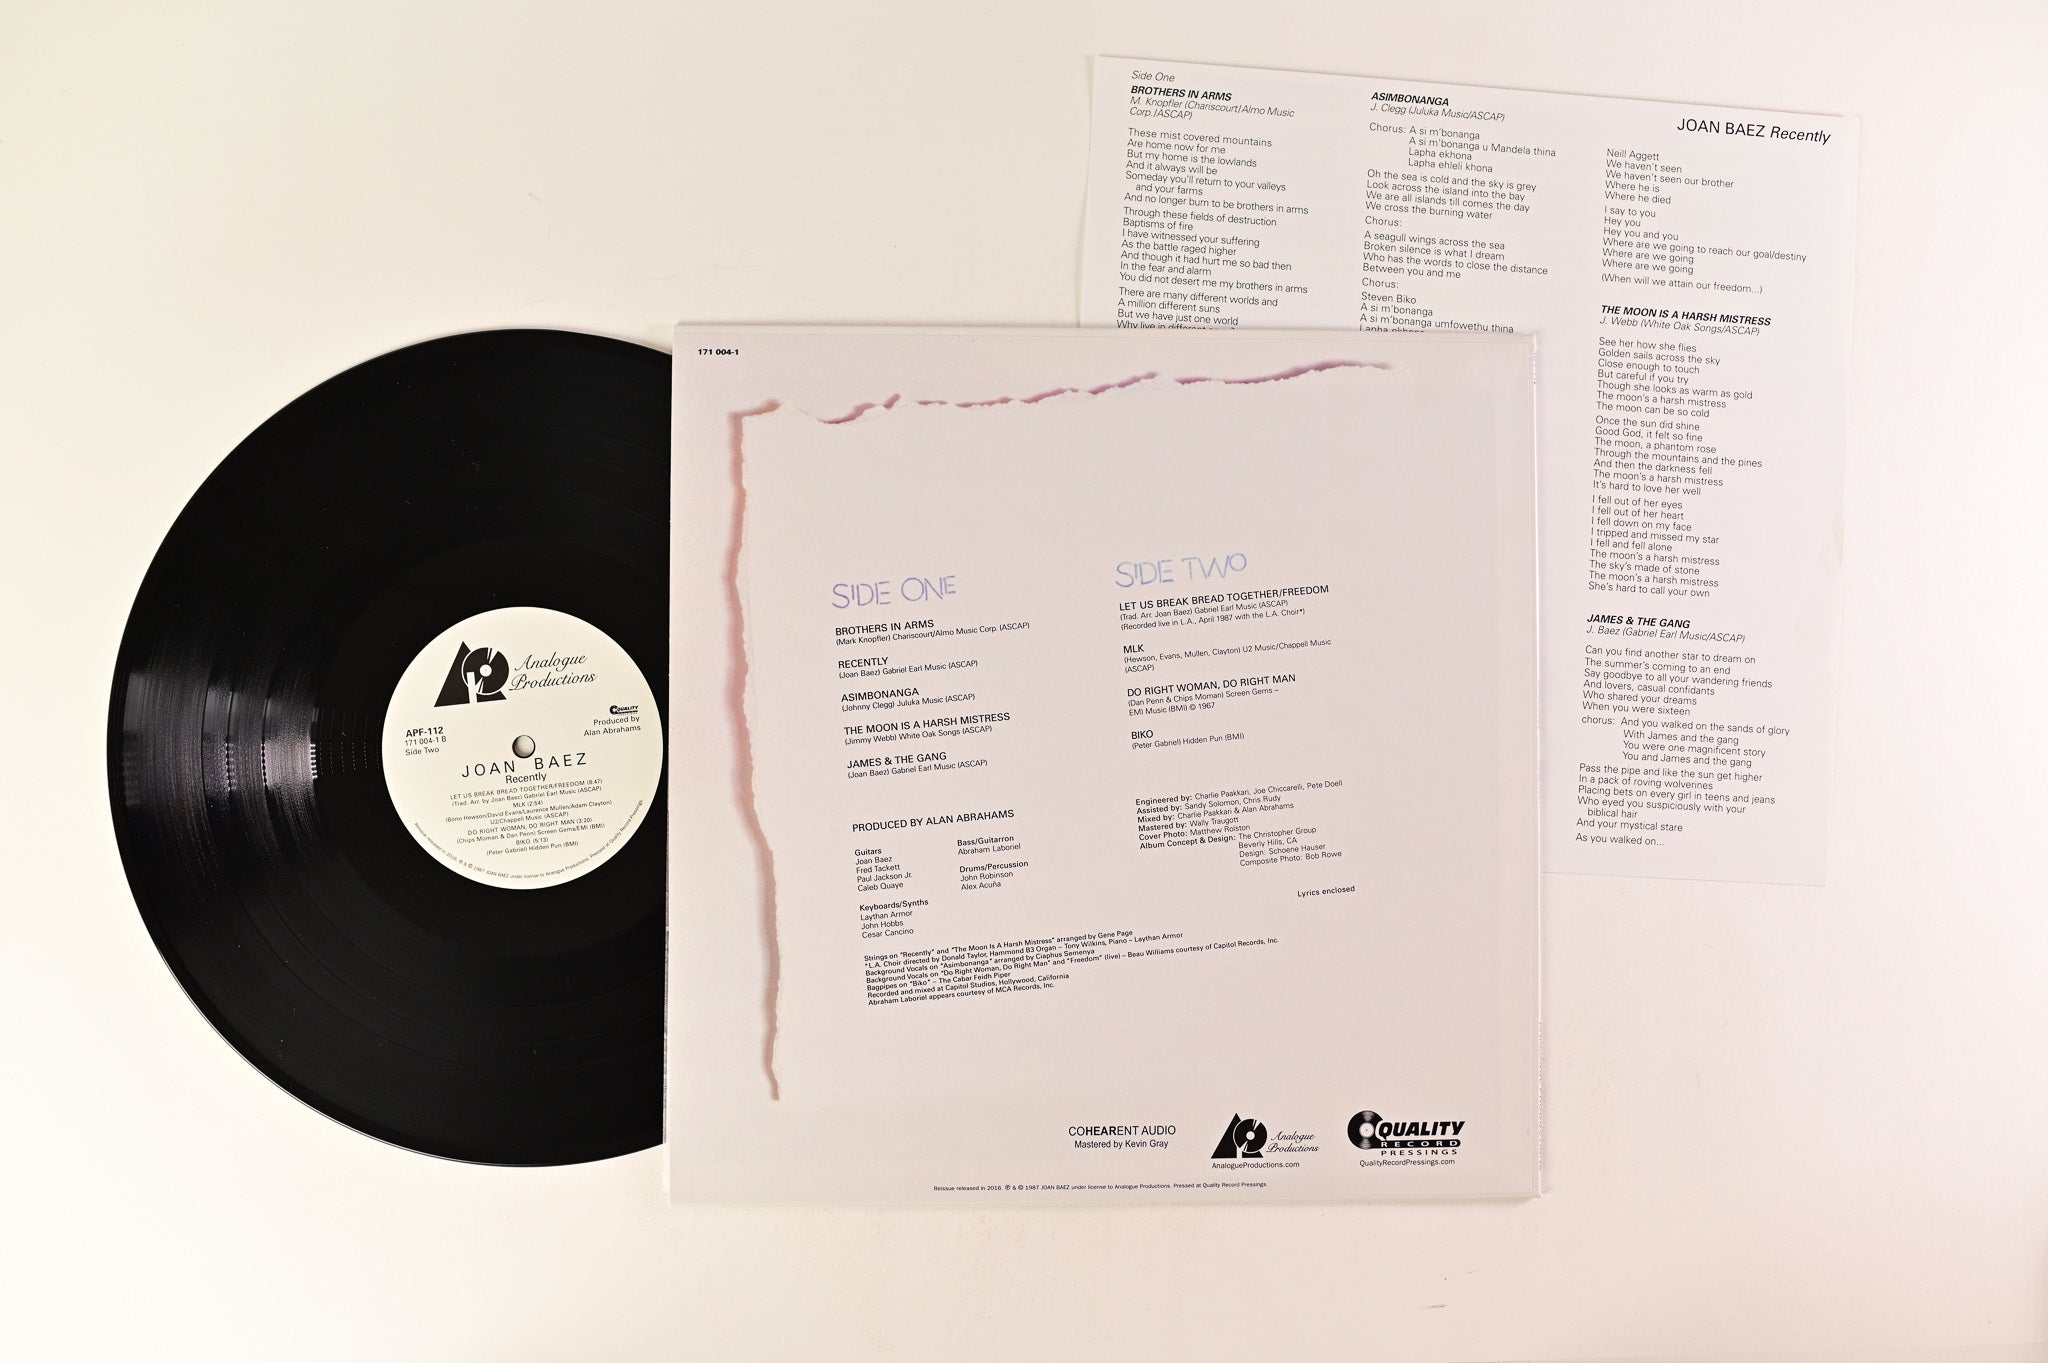 Joan Baez - Recently Reissue on Analogue Productions